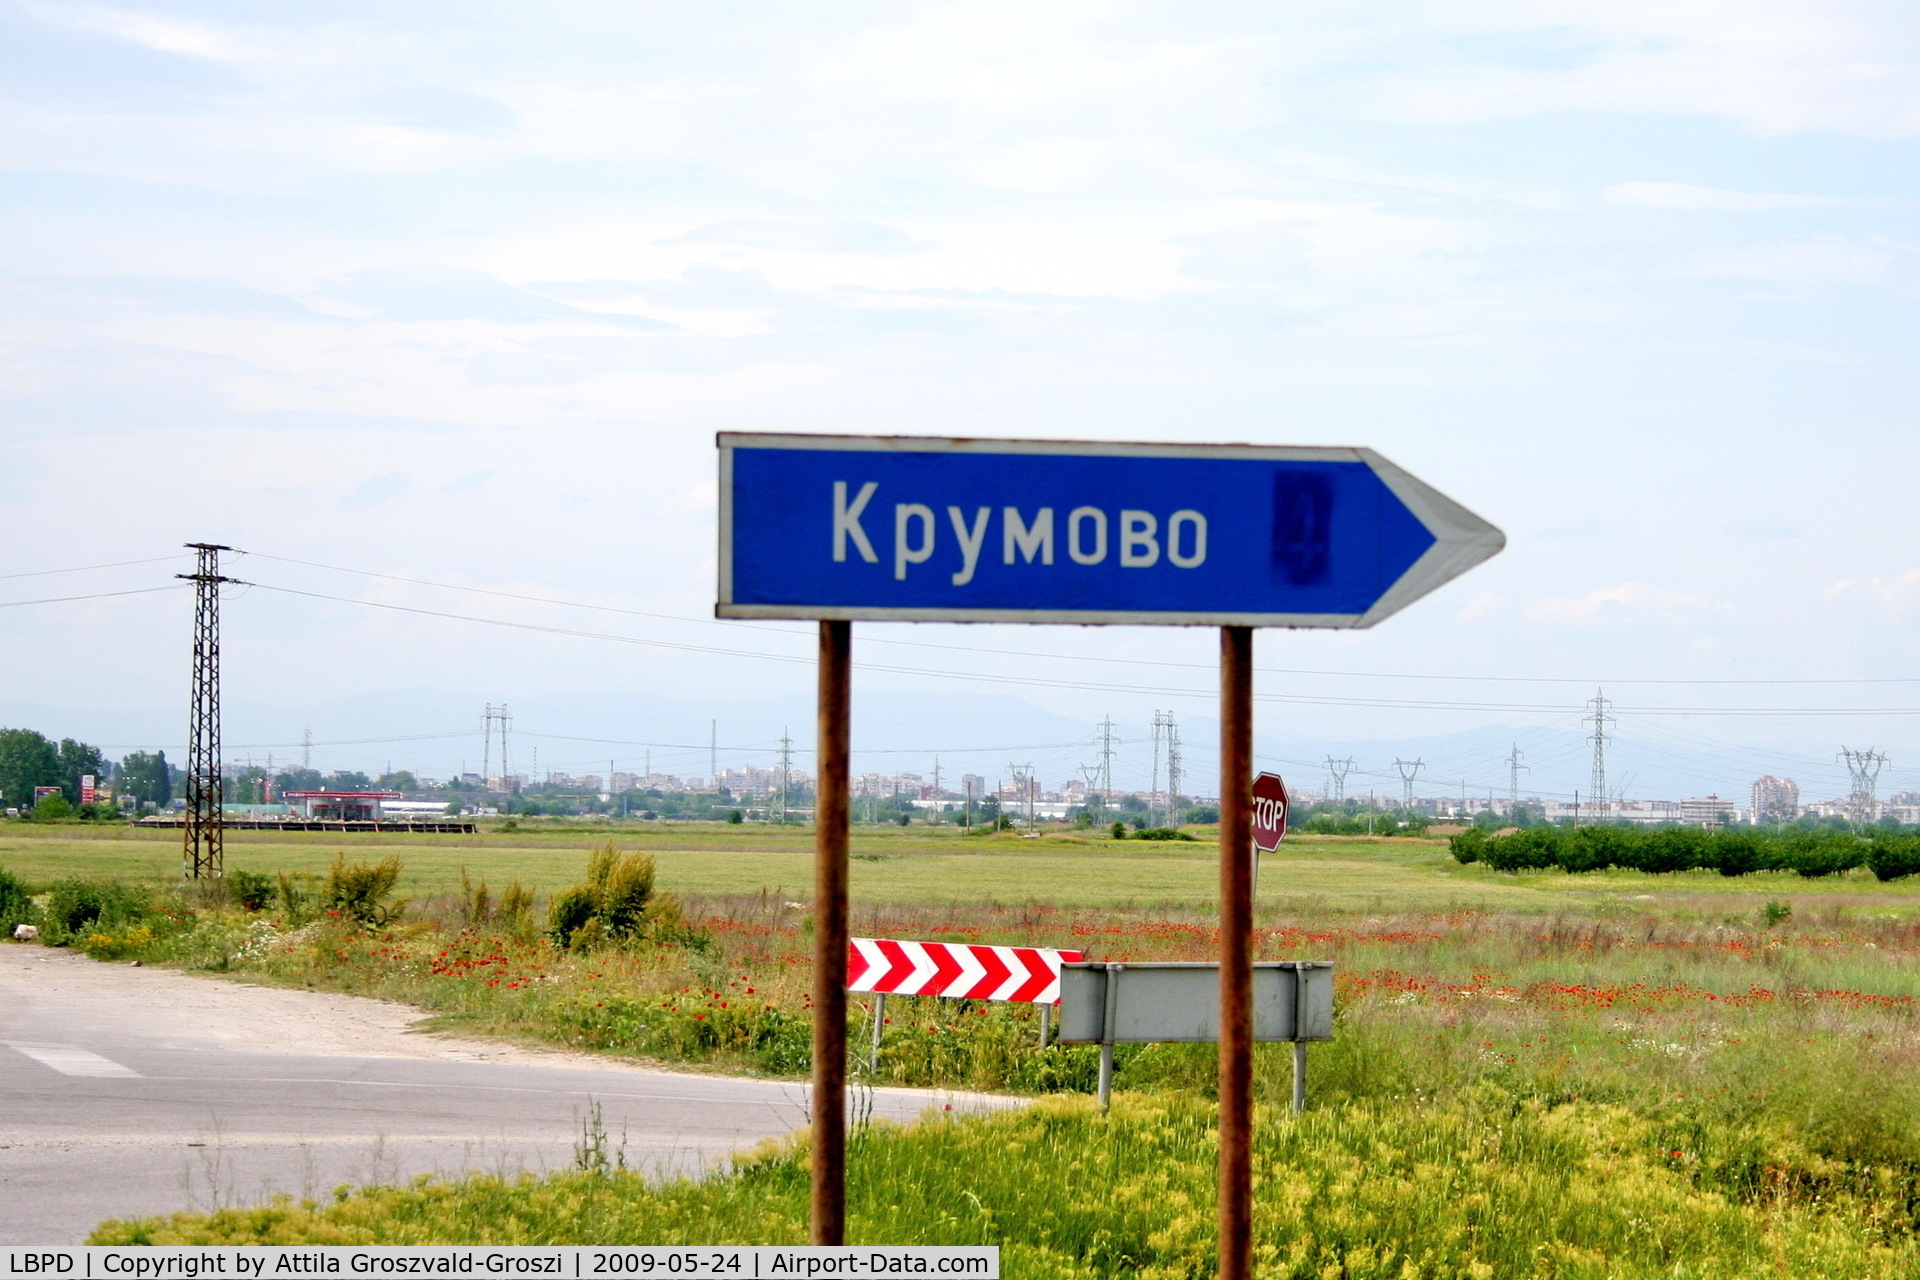 Plovdiv International Airport, Plovdiv Bulgaria (LBPD) - Plovdiv-Krumovo International Airport - LBPD - The board of the road leading to the international airport, a guide.